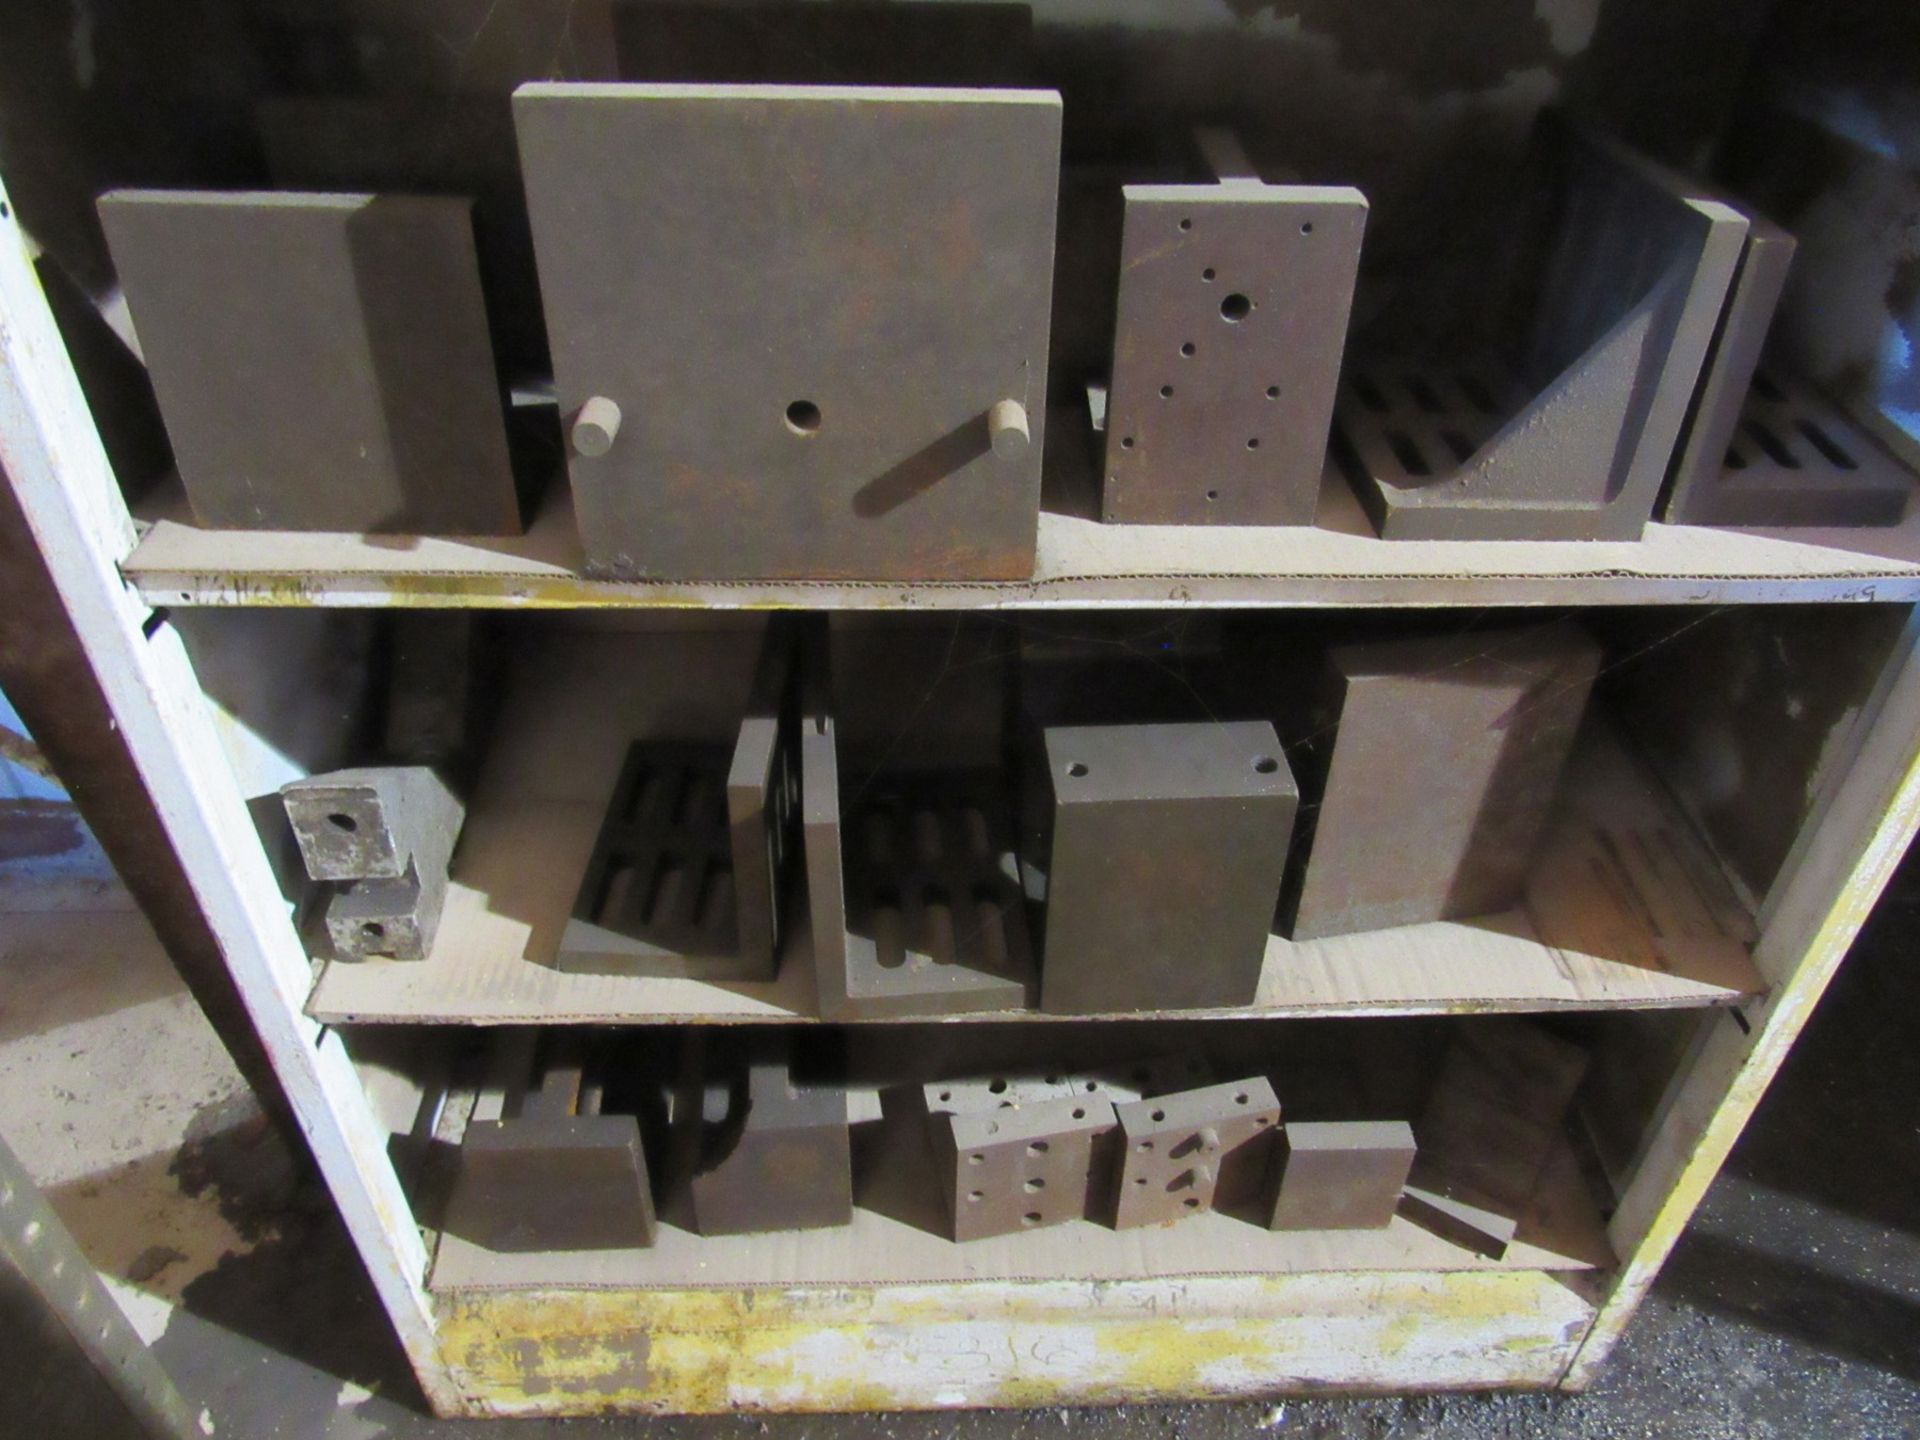 6 Shelf Rack with Tooling for Cincinnati Dial Type Mill - Image 5 of 5